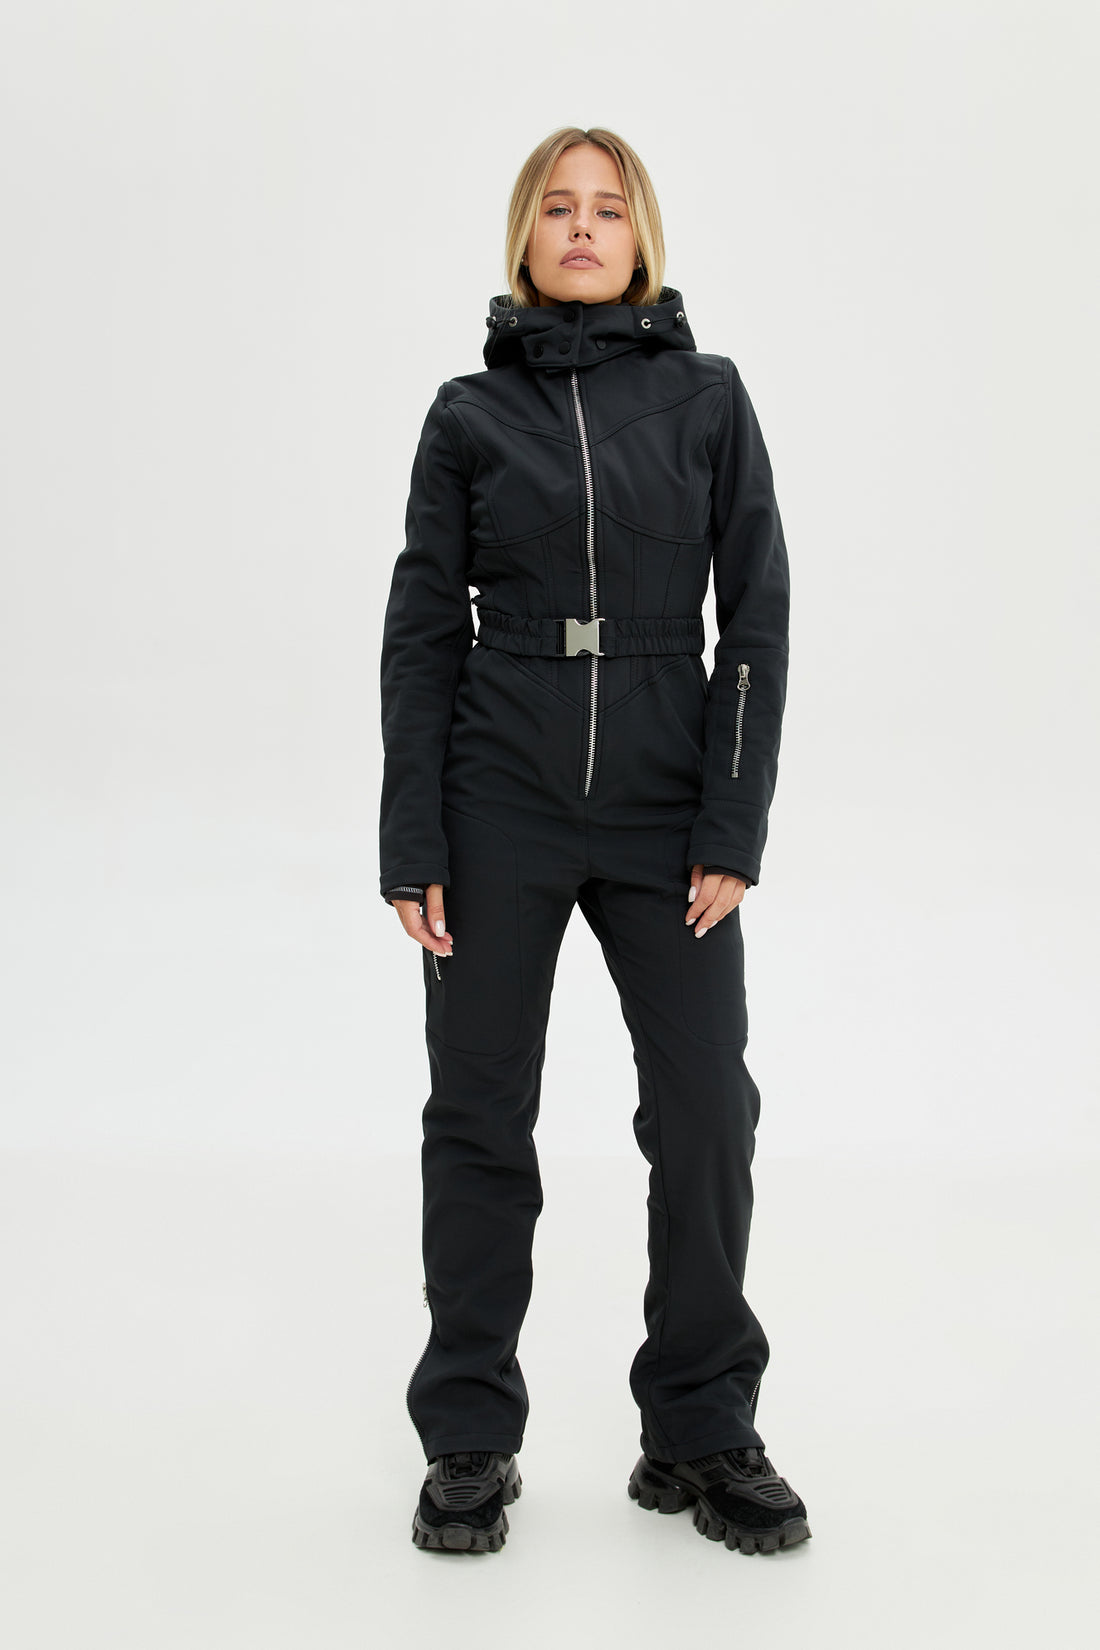 Skisuit with skinny pants TABLE - BLACK Slim fit ski suit for chic winter vacation outfit